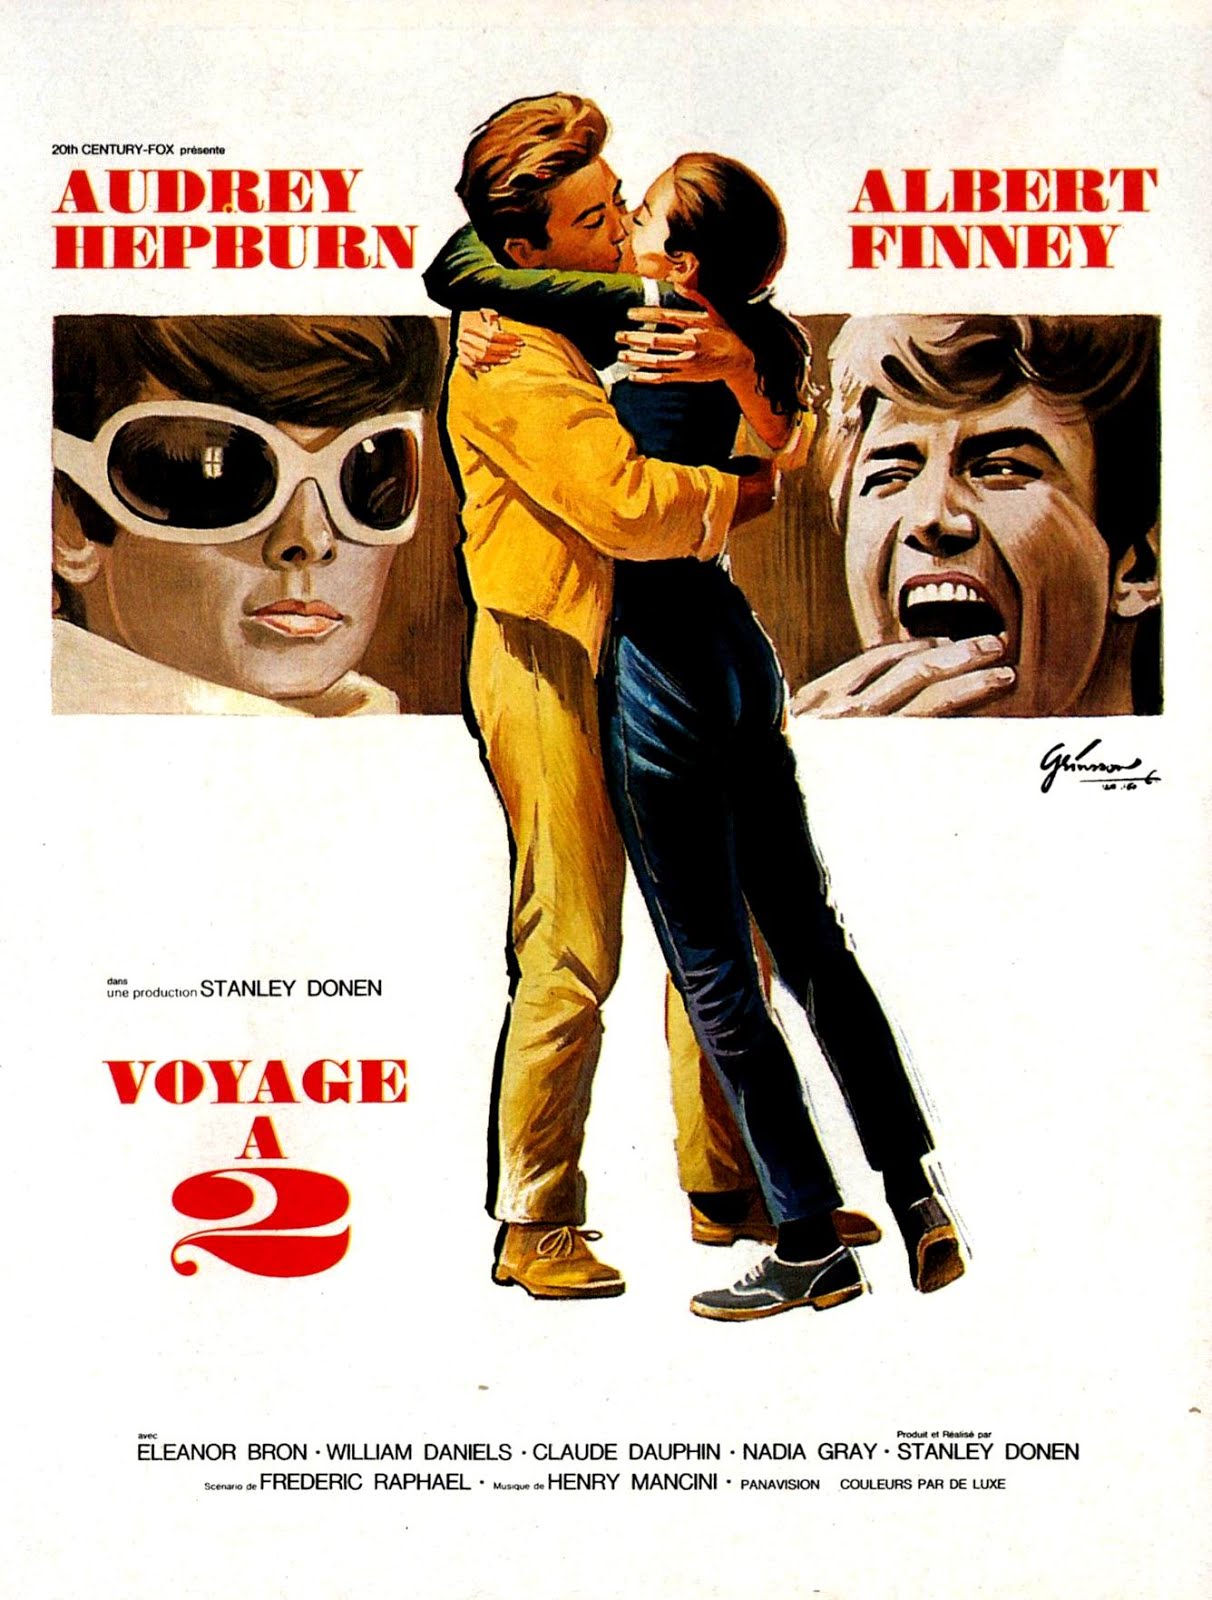 Voyage à 2 (1966) Stanley Donen - Two for the road (03.05.1966 / 01.09.1966)